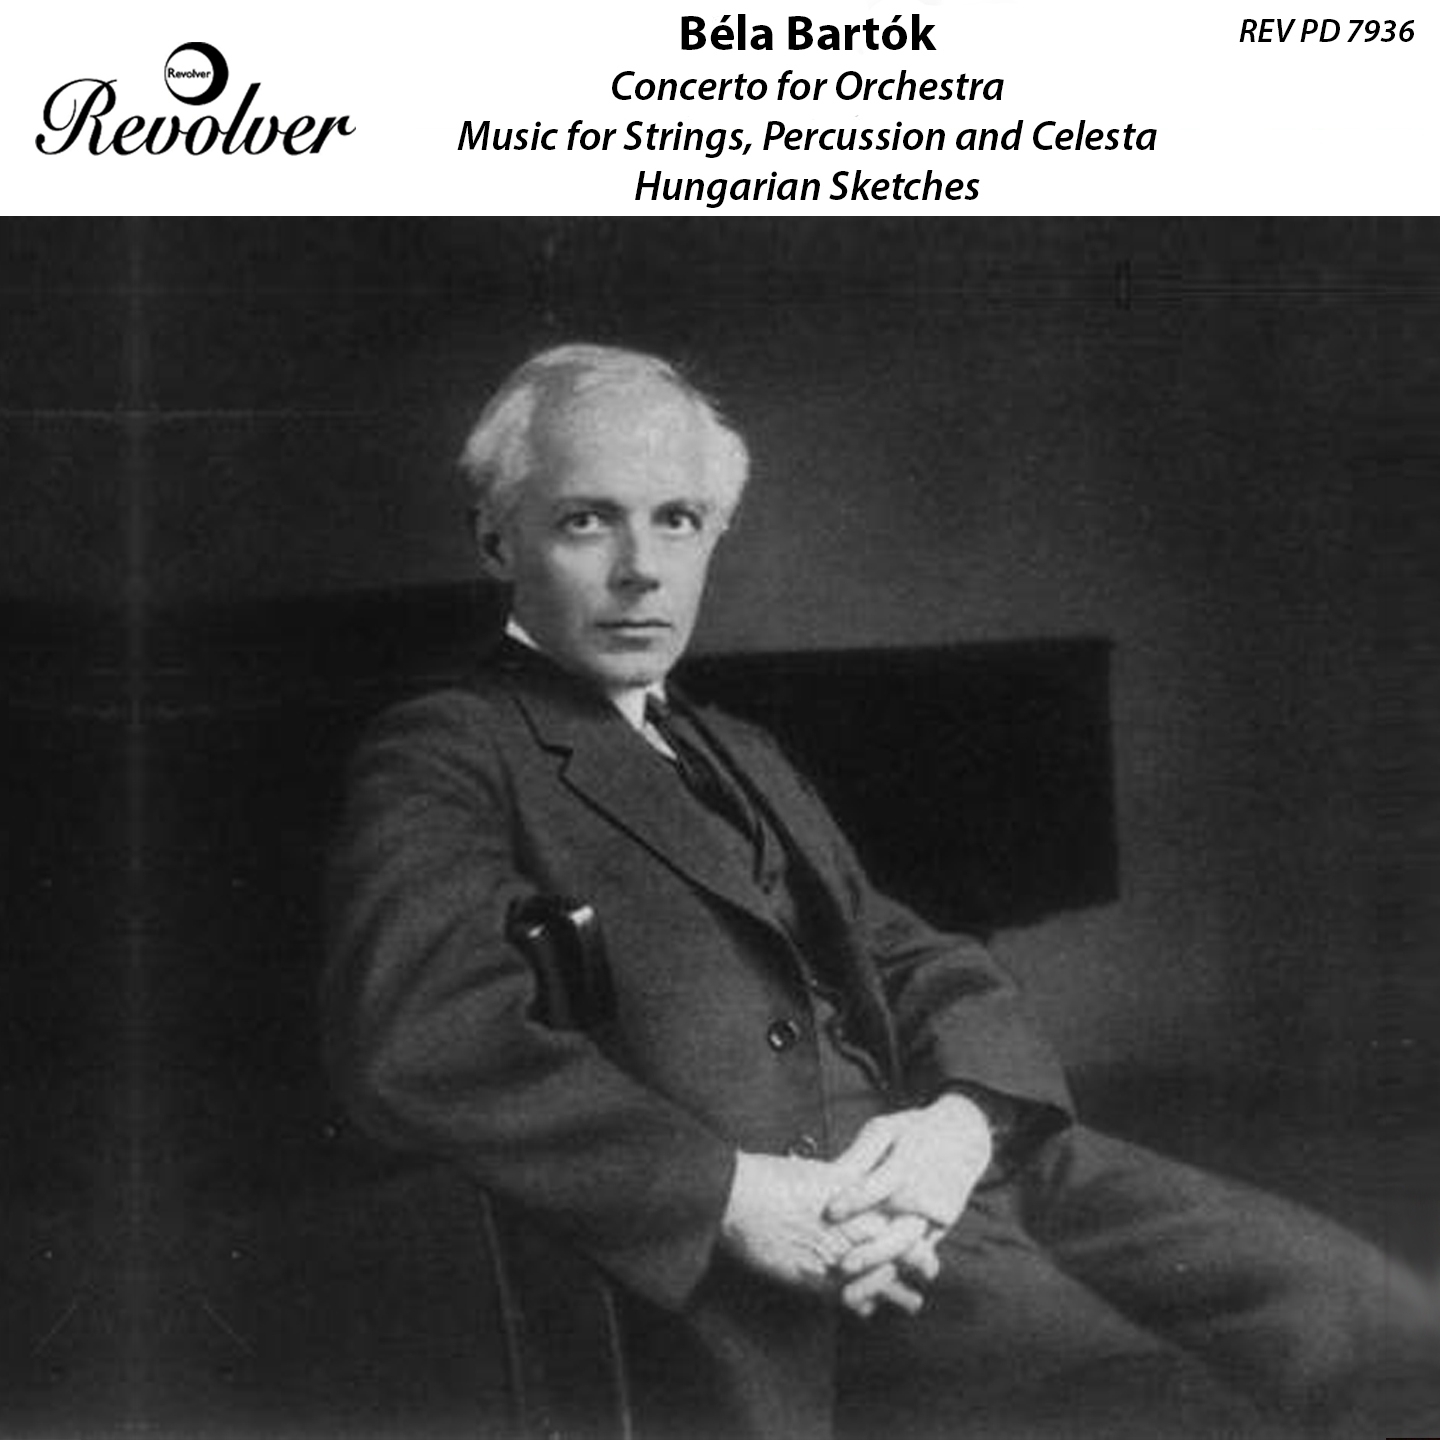 Bartók: Concerto for Orchestra, Music for Strings, Percussion and Celesta & Hungarian Sketches